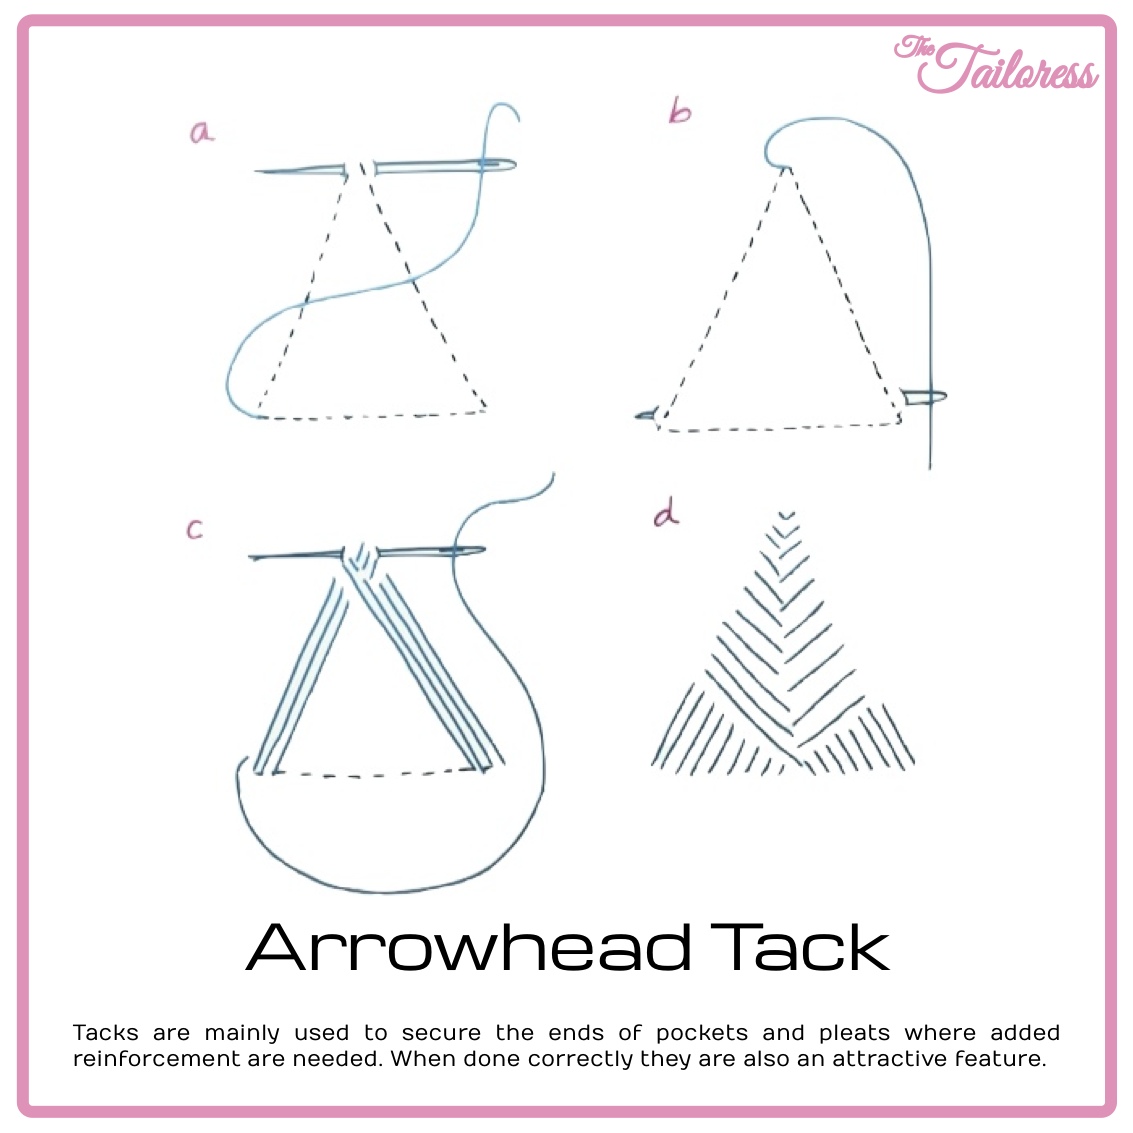 Arrowhead Tack - The Tailoress PDF Sewing Patterns